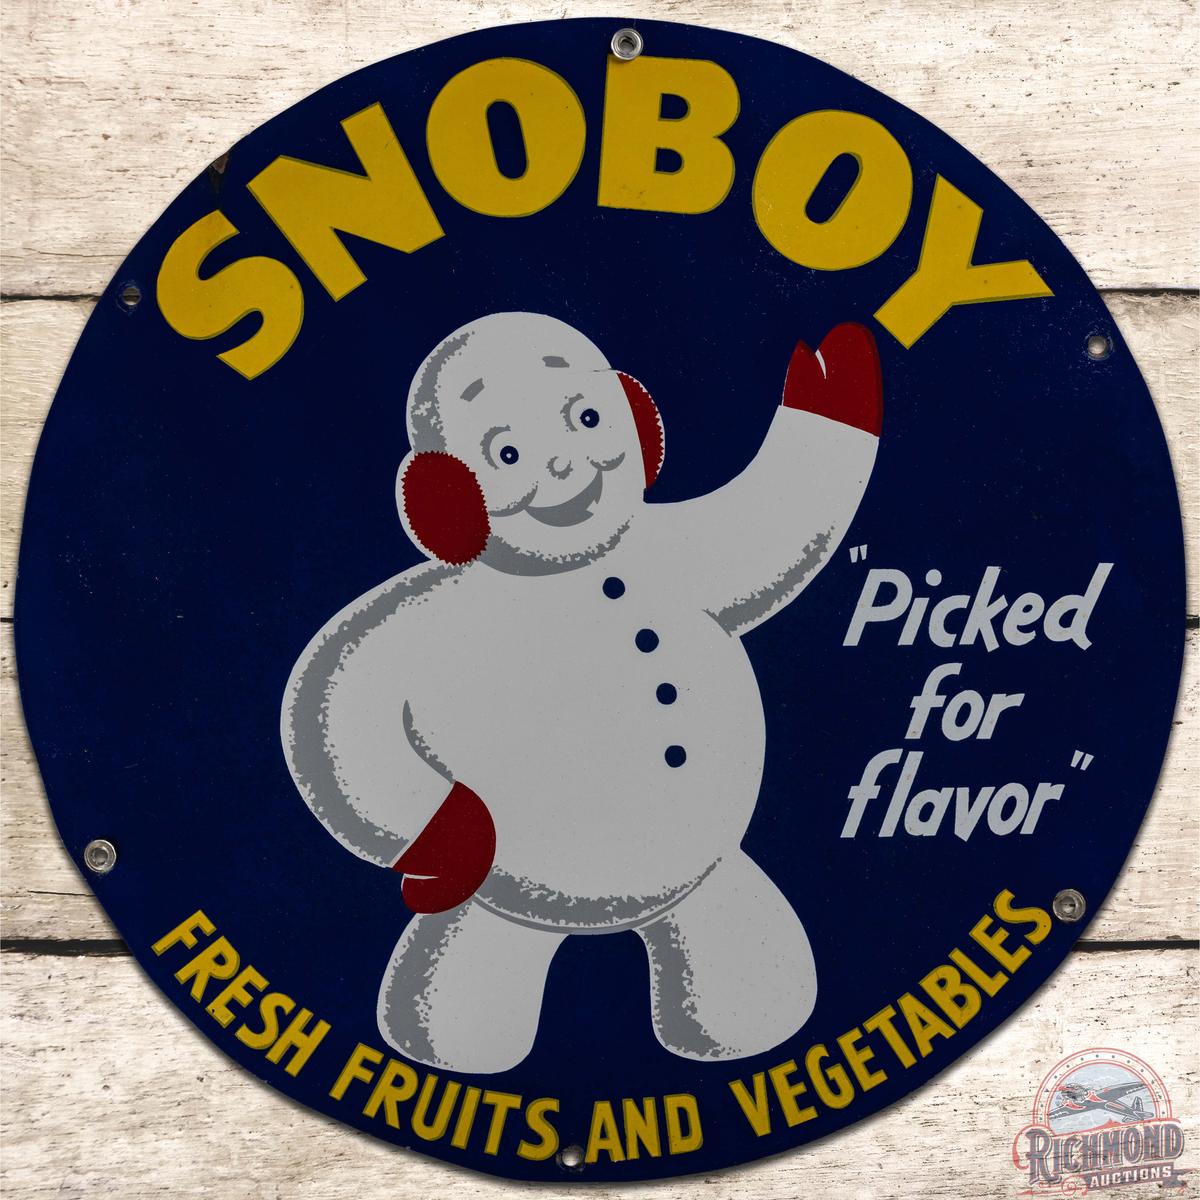 Snoboy "Picked for Flavor" Fresh Fruits and Vegetables 20" SS Tin Sign